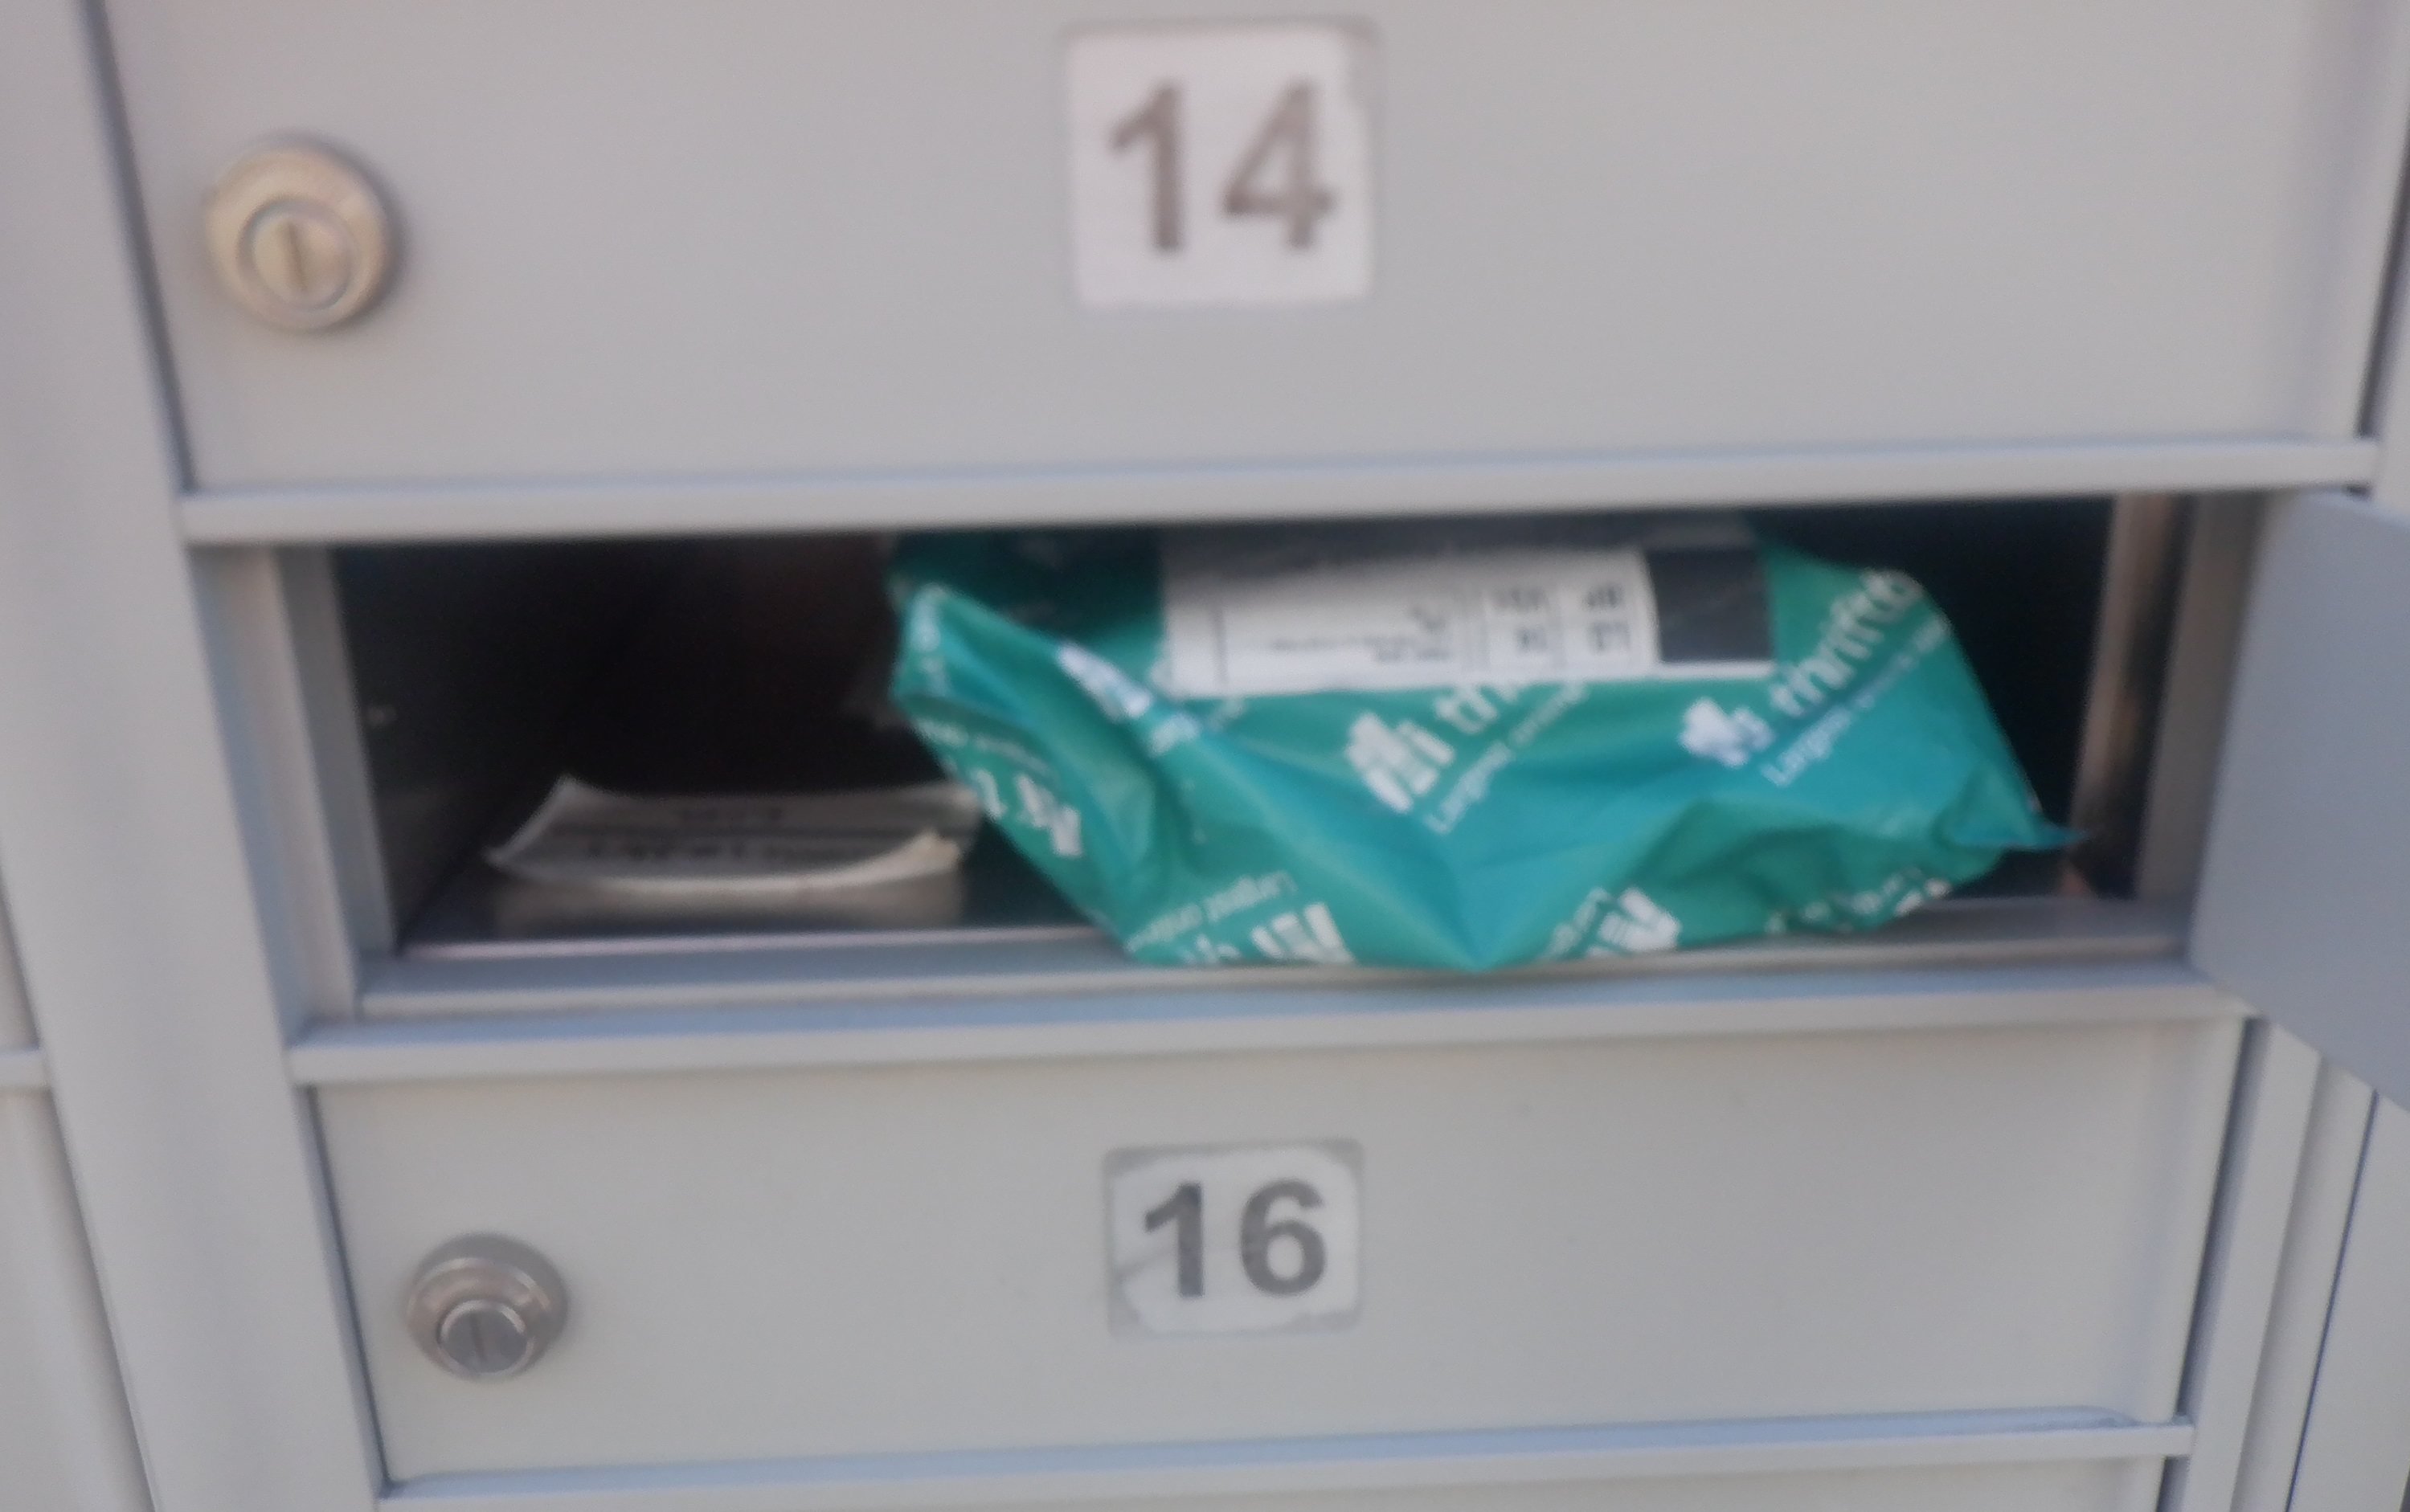 Photo I took of the package (and the stuff hidden under/behind it) in my mailbox